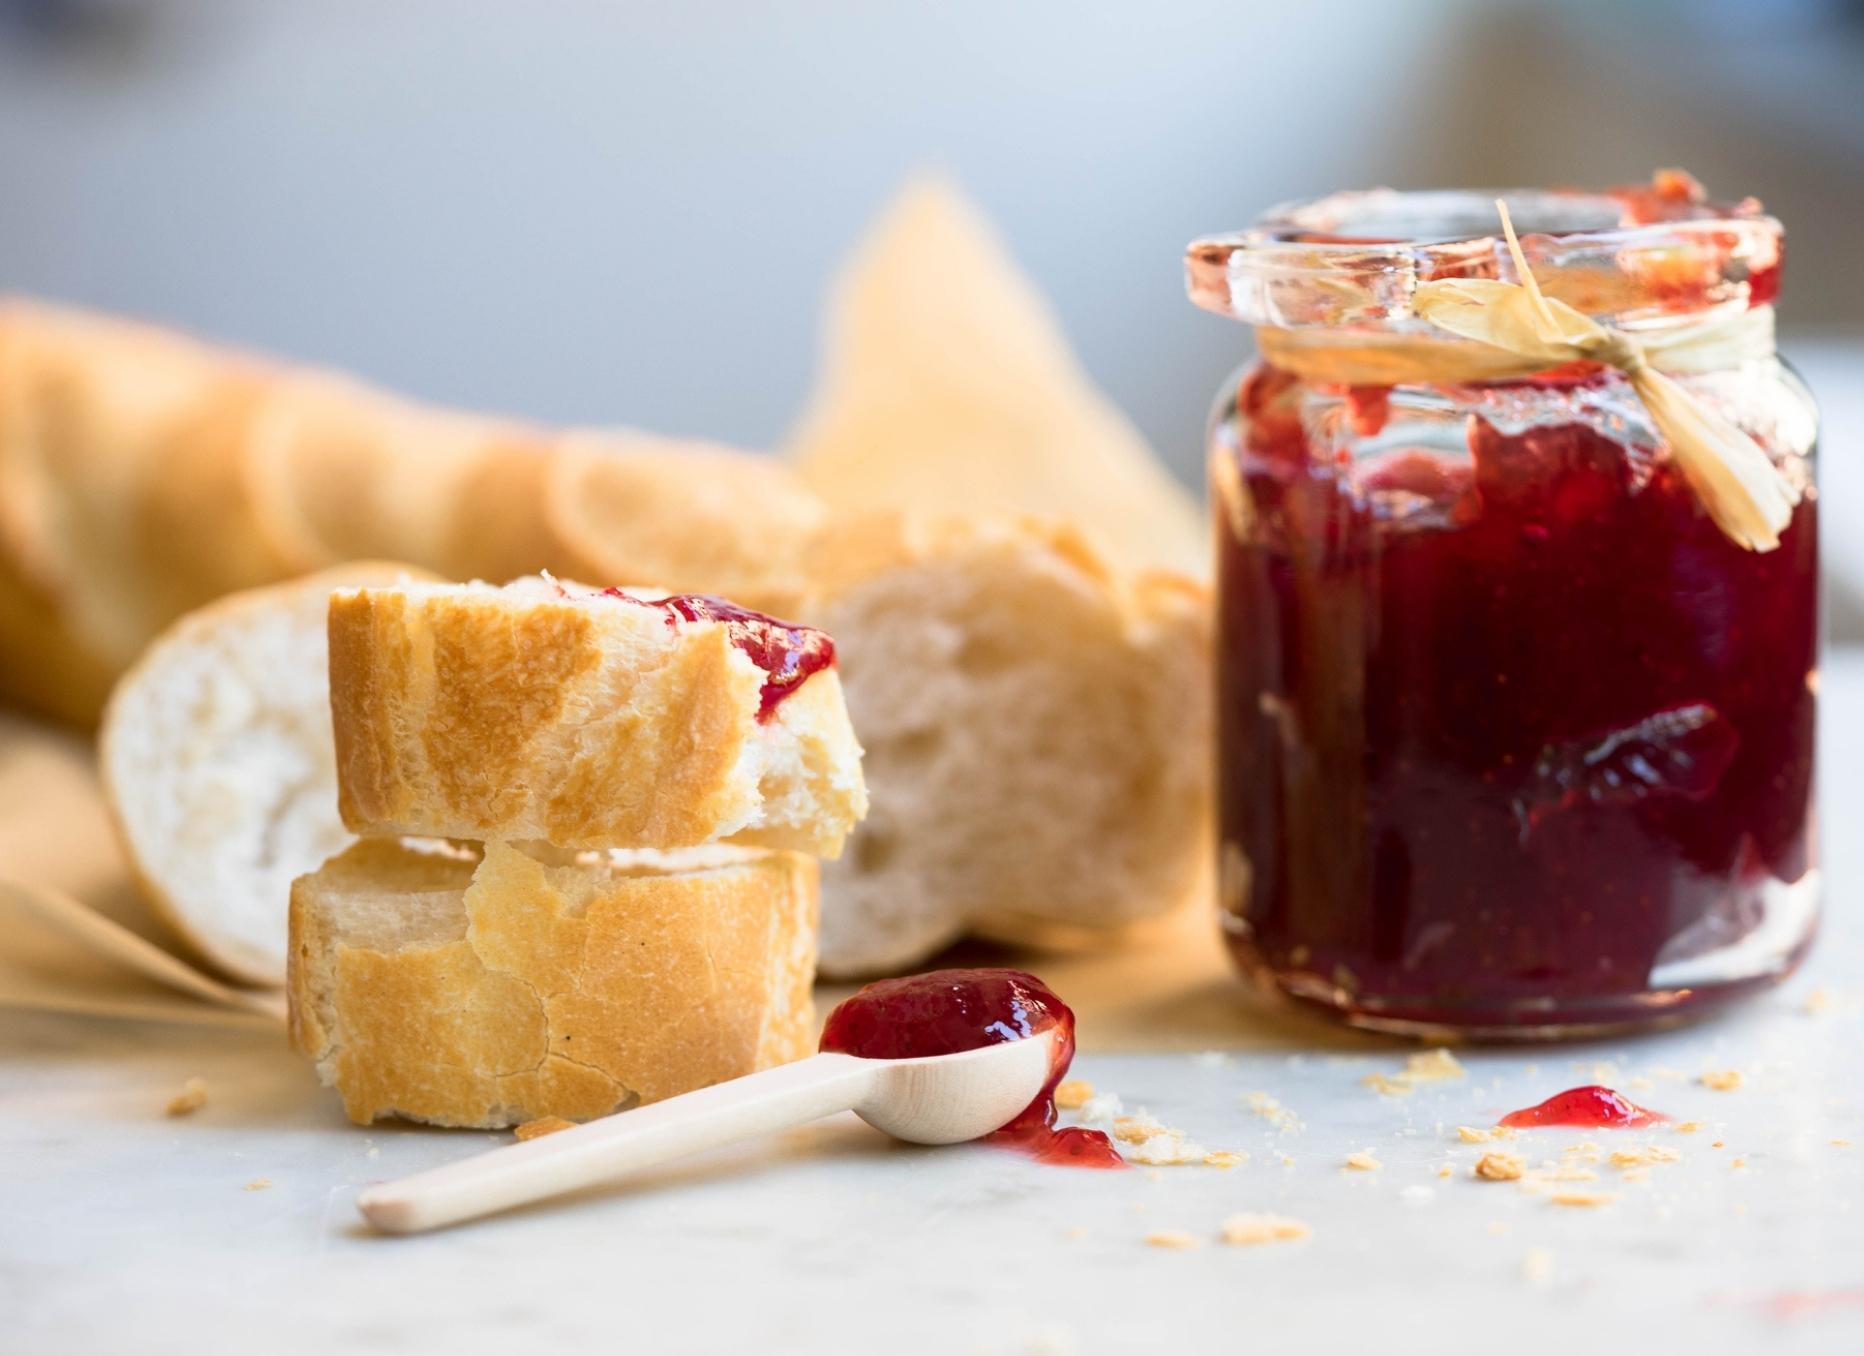 Baguette and jam